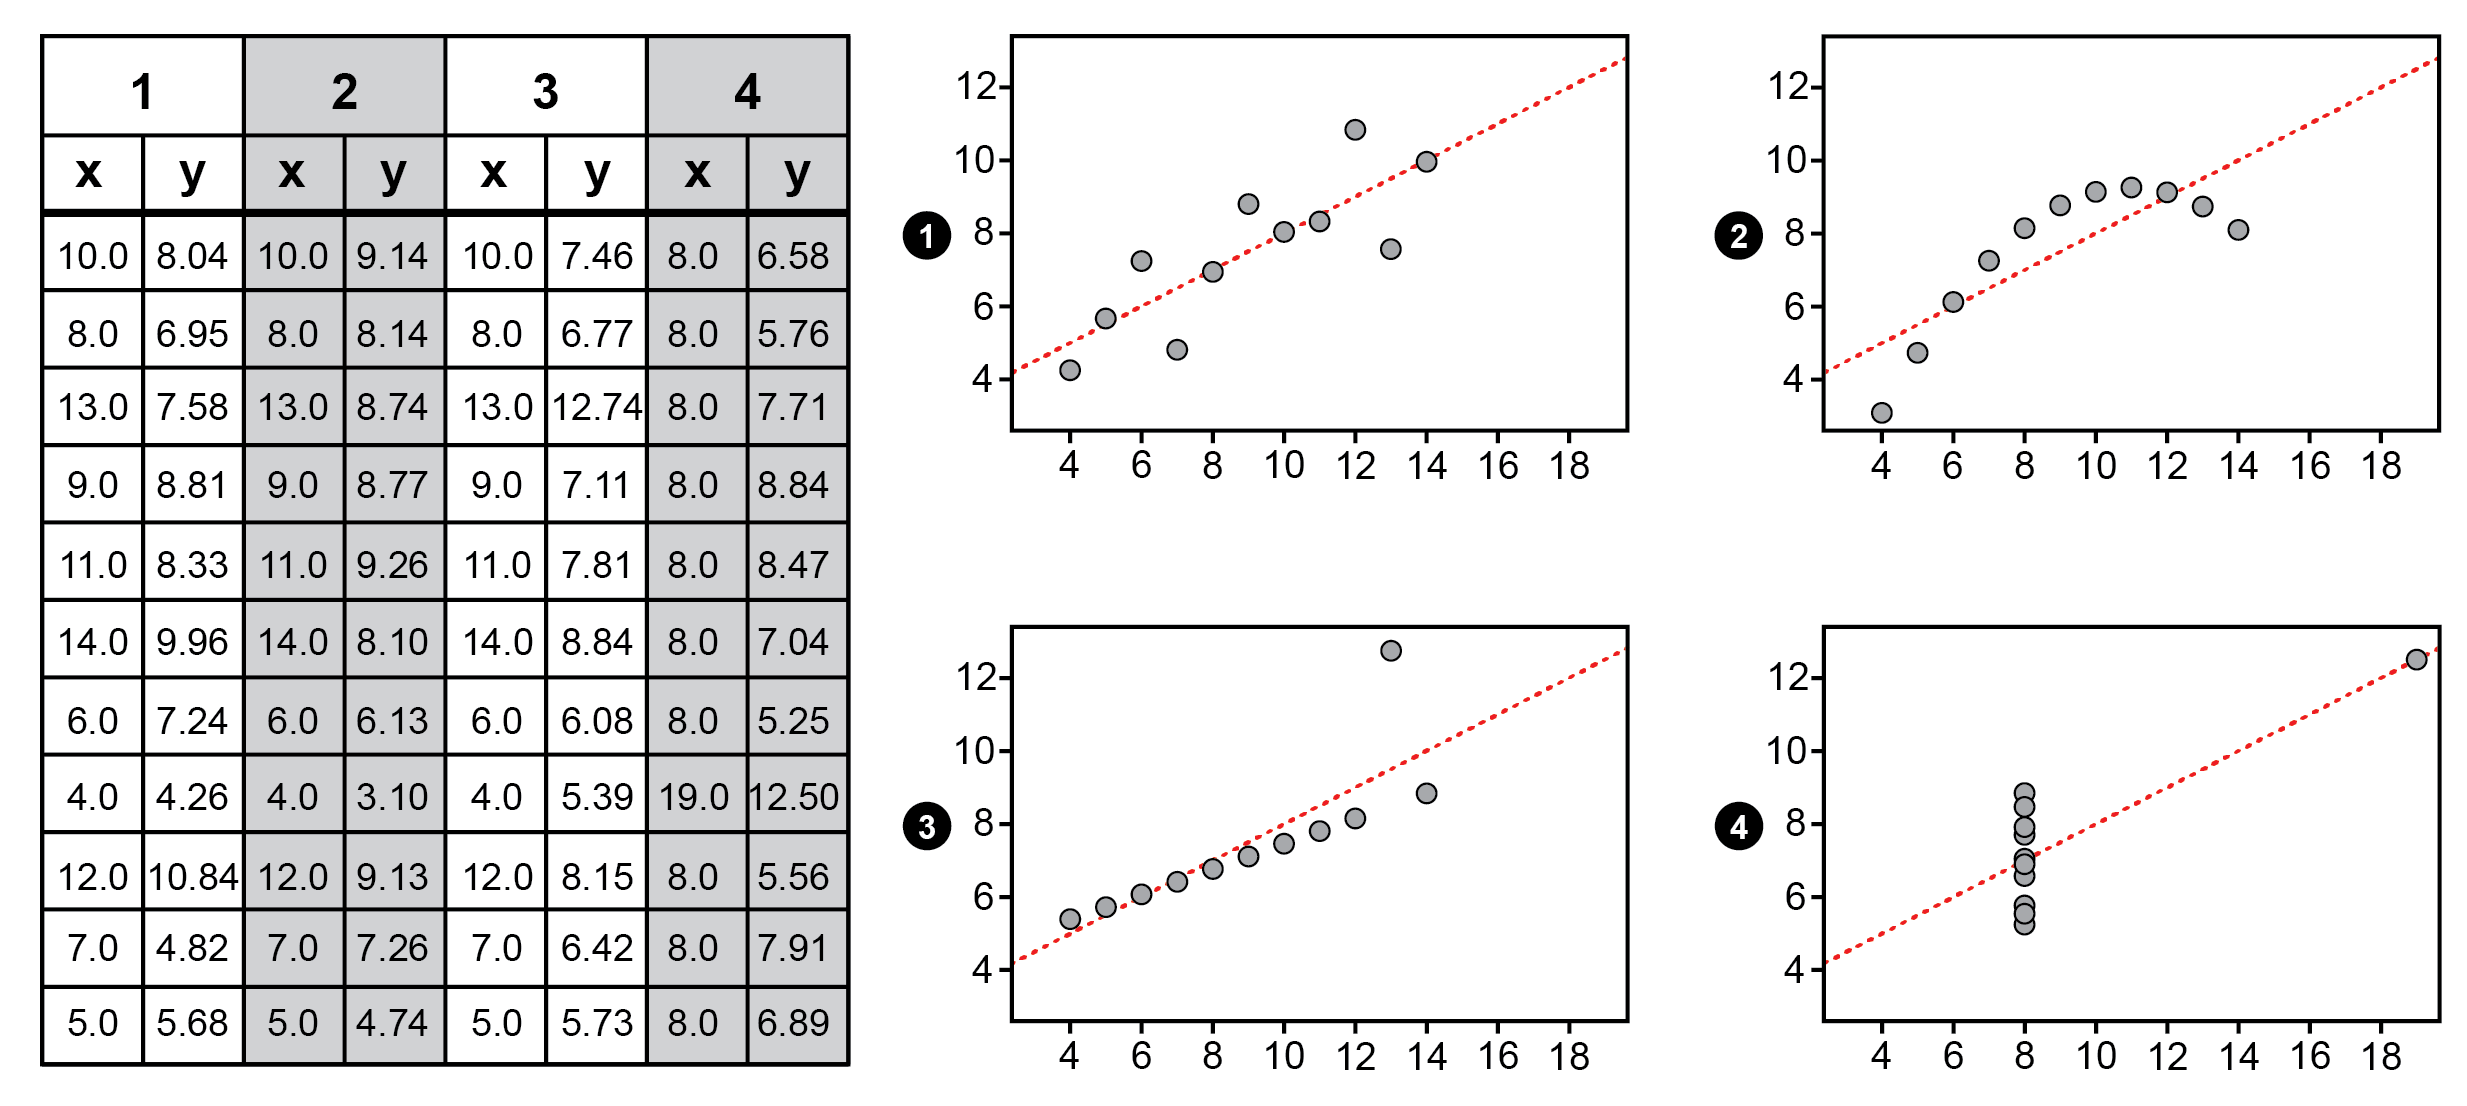 Table and corresponding graphs intended to demonstrate the importance of graphing data